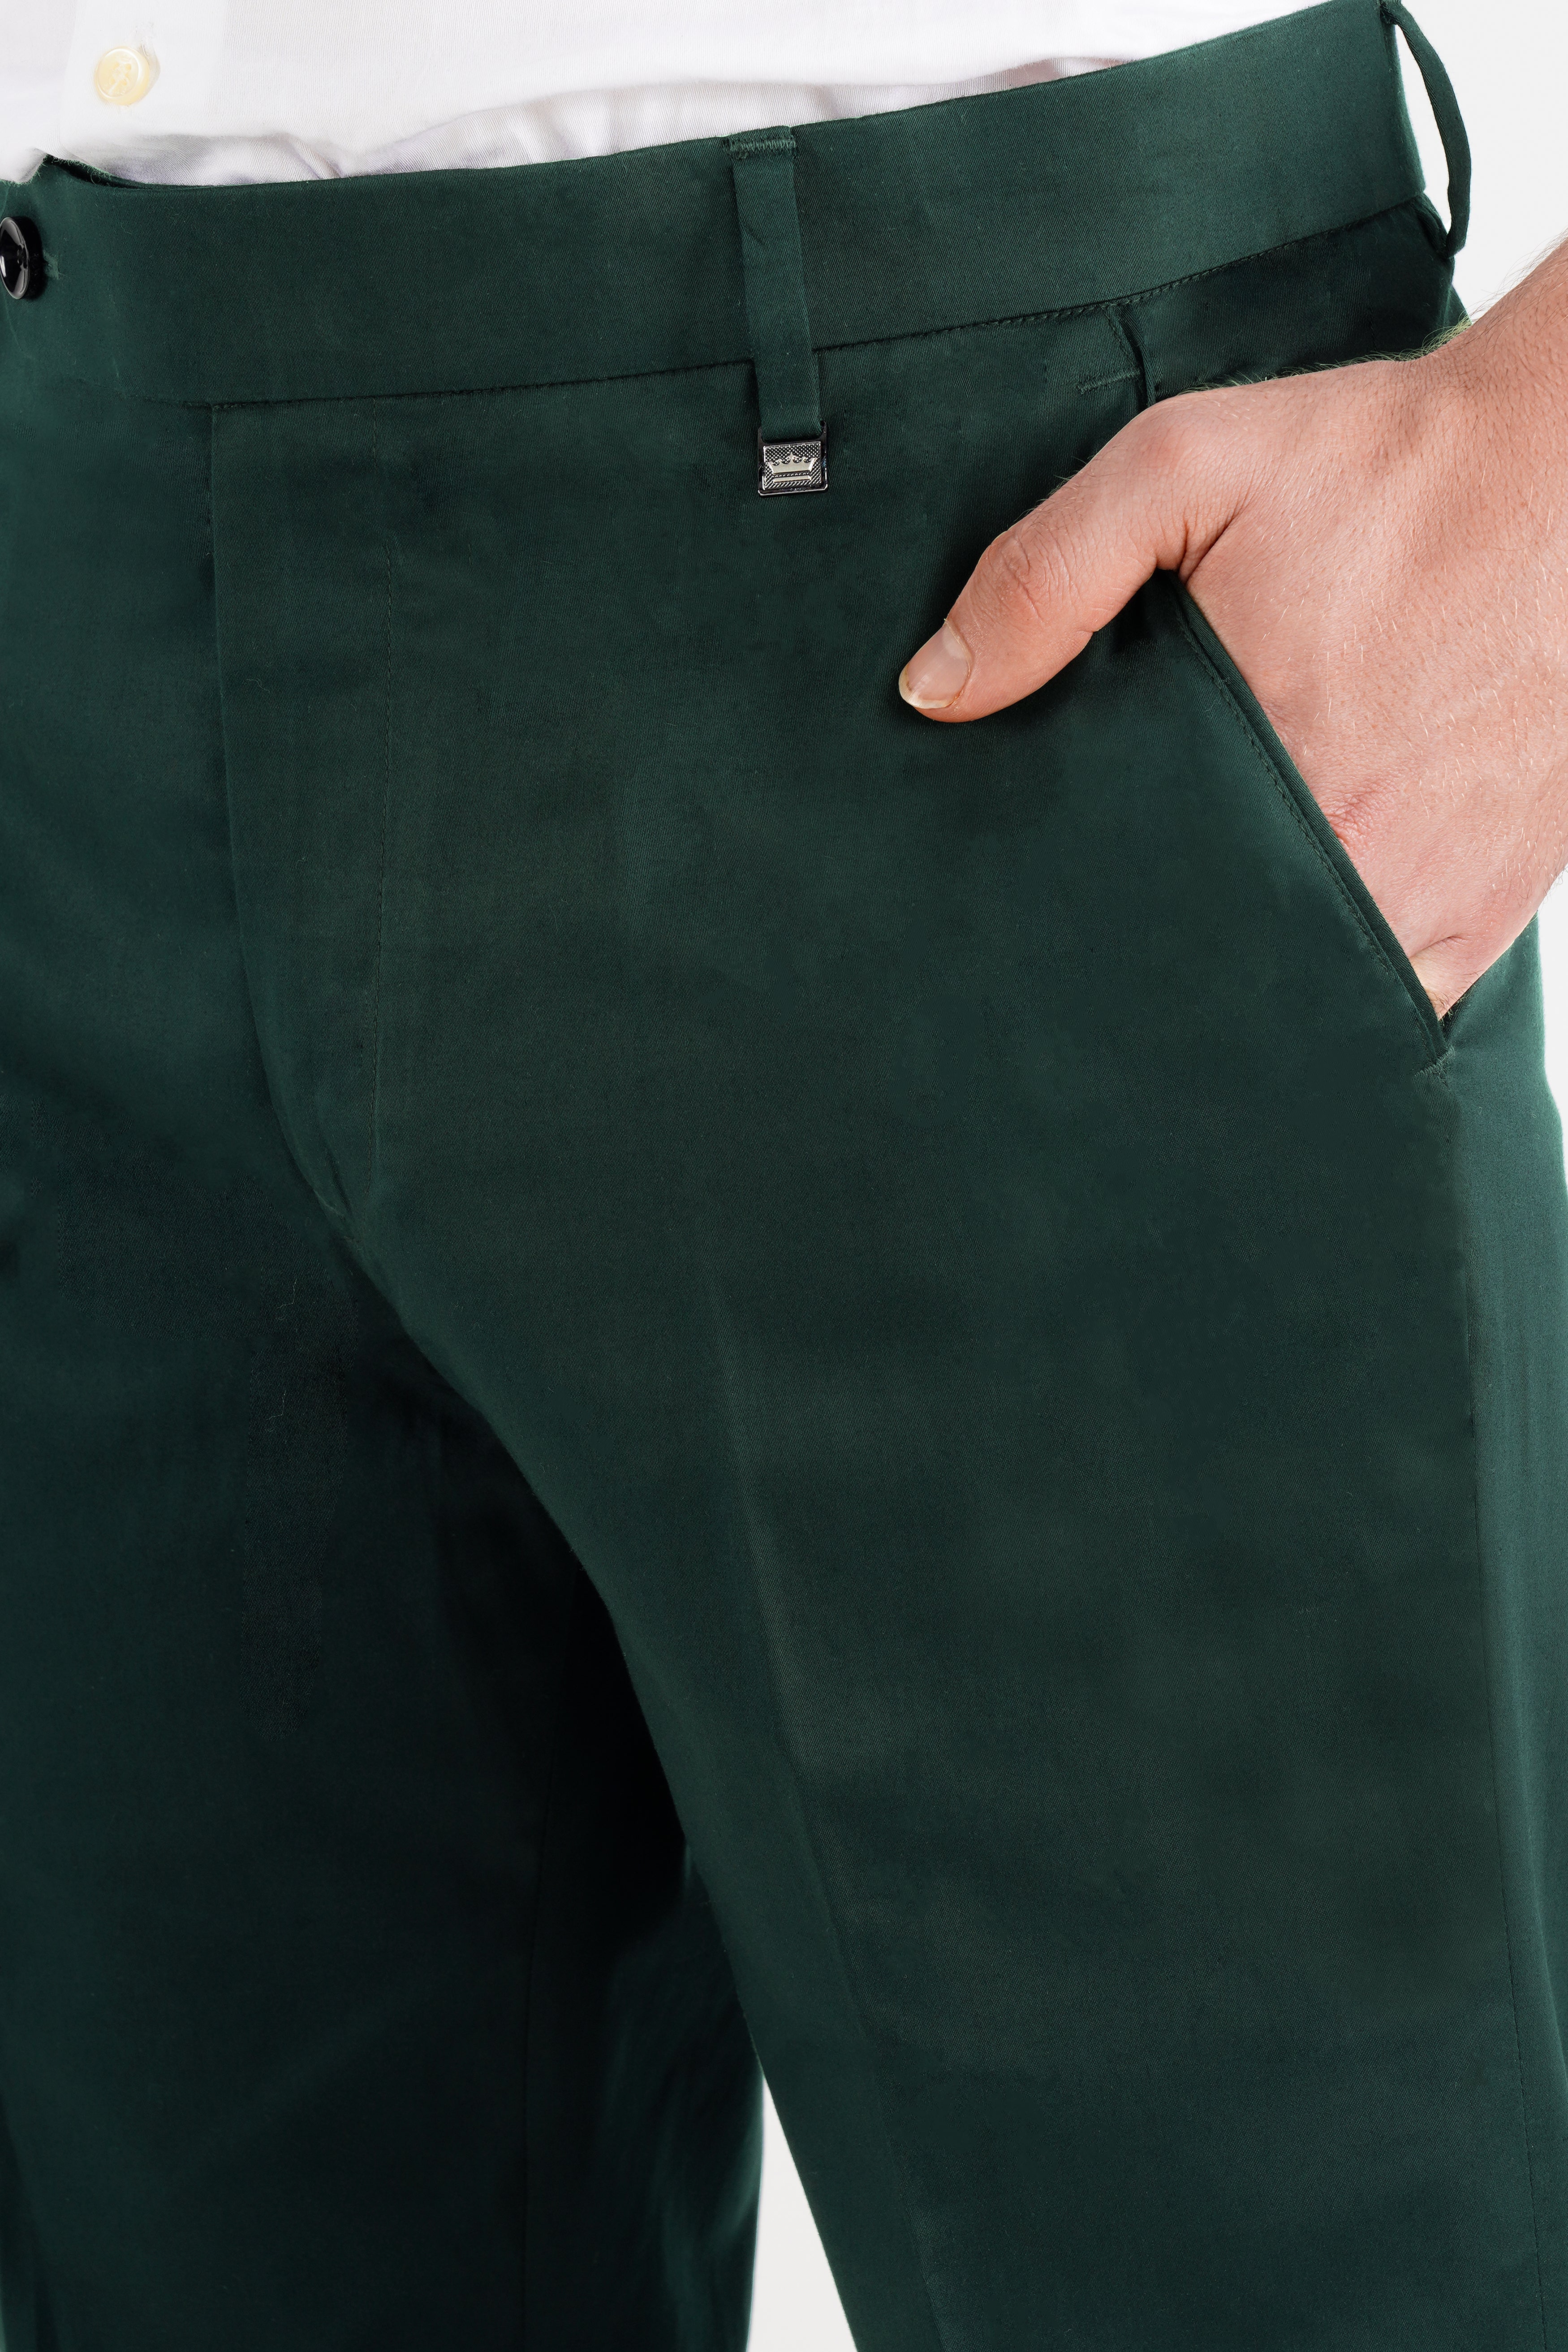 Green Pants For Men Male Casual Business Solid Slim Pants Zipper Fly Pocket  Cropped Pencil Pant Trousers - Walmart.com